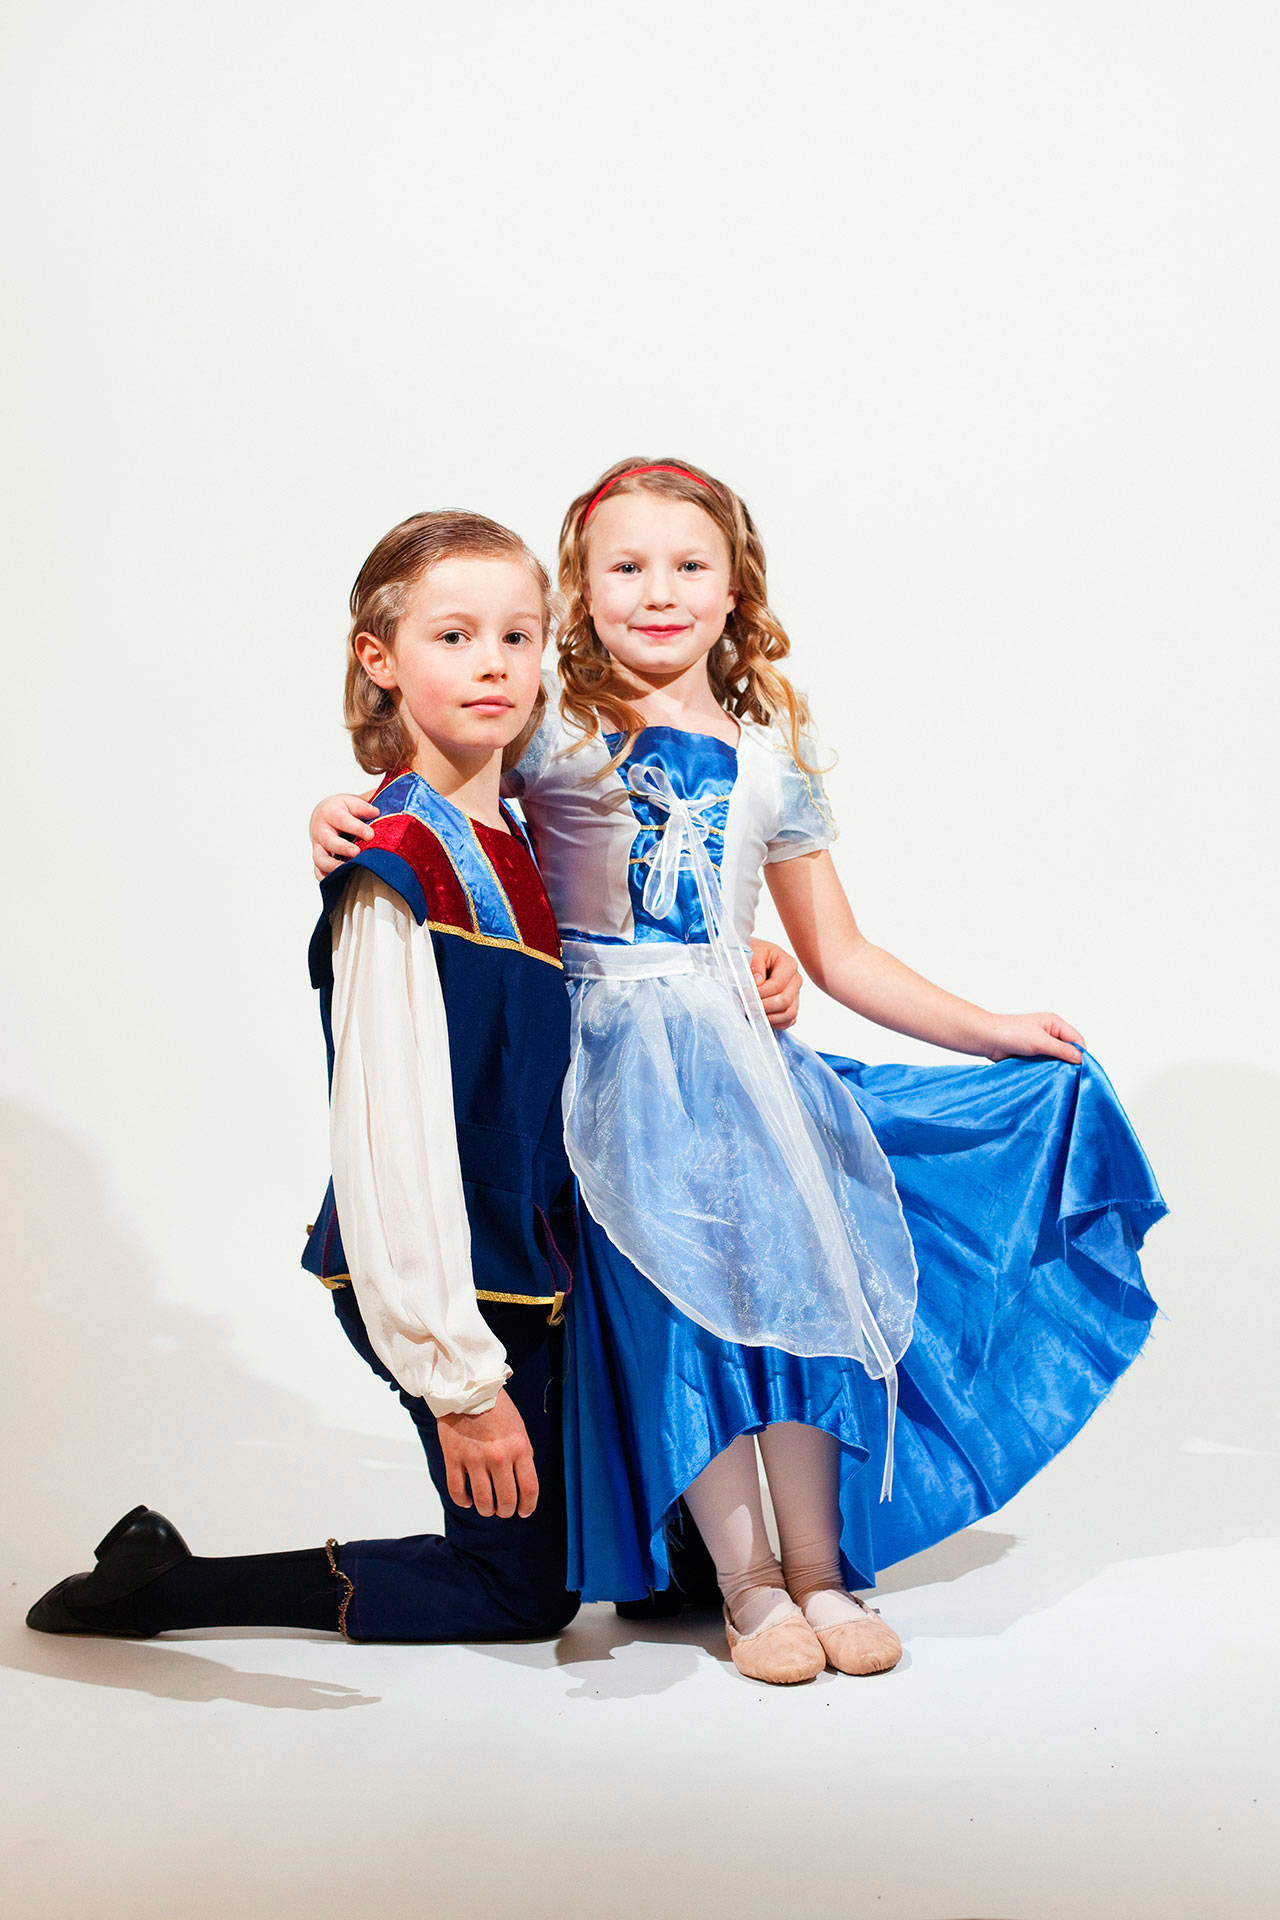 Poppy Beck will perform as young Snow White and Gerrit Van Roekel as the young prince. (Linda Crayton Photo)